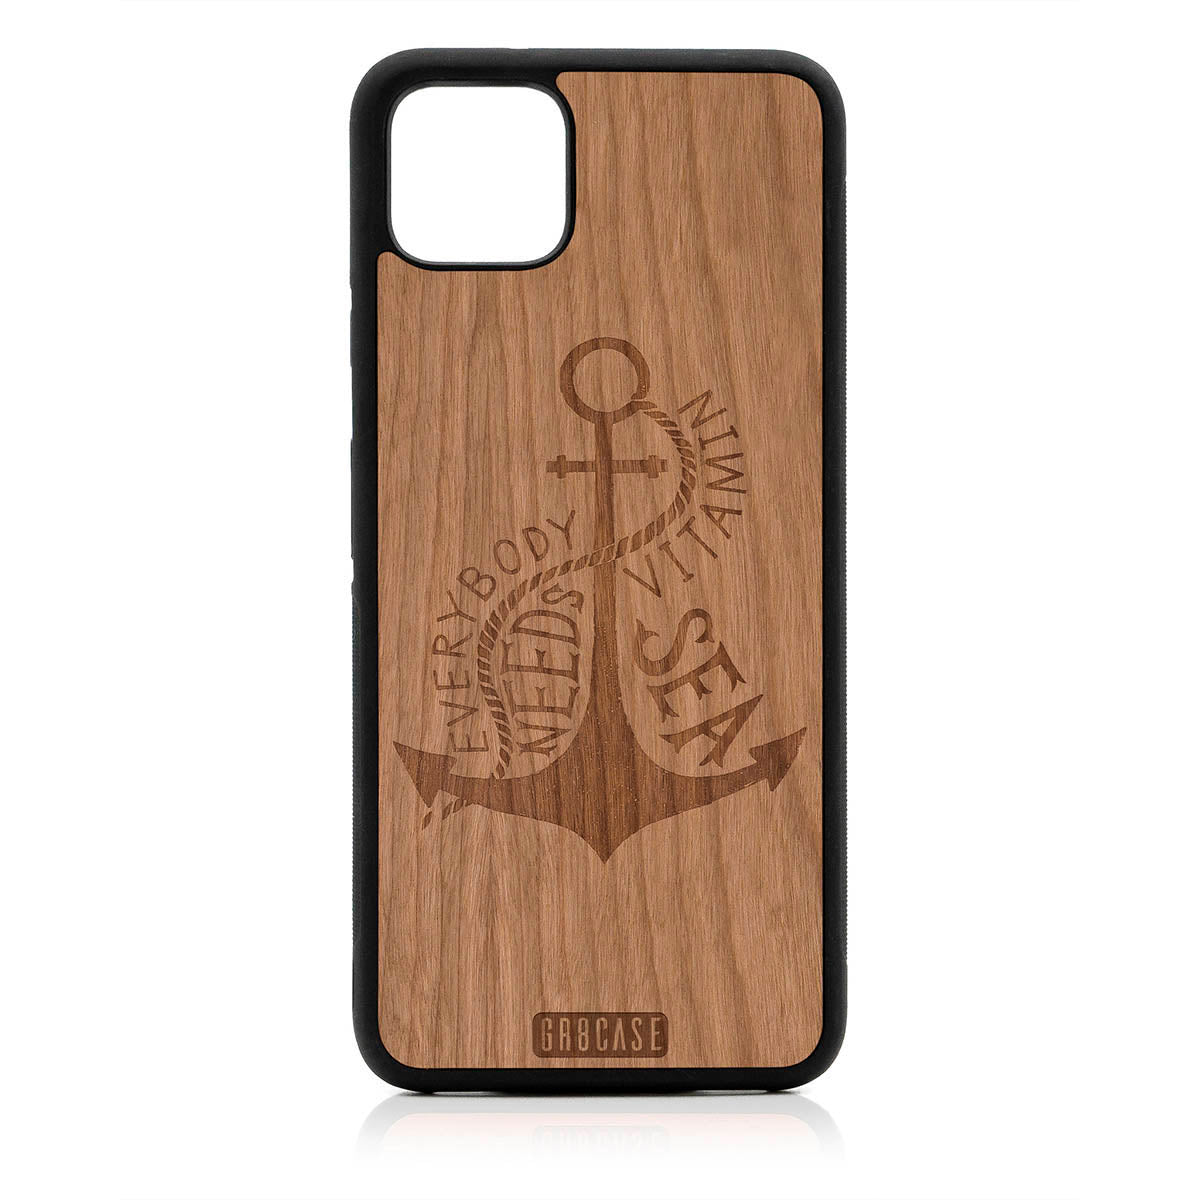 Everybody Needs Vitamin Sea (Anchor) Design Wood Case For Google Pixel 4XL by GR8CASE